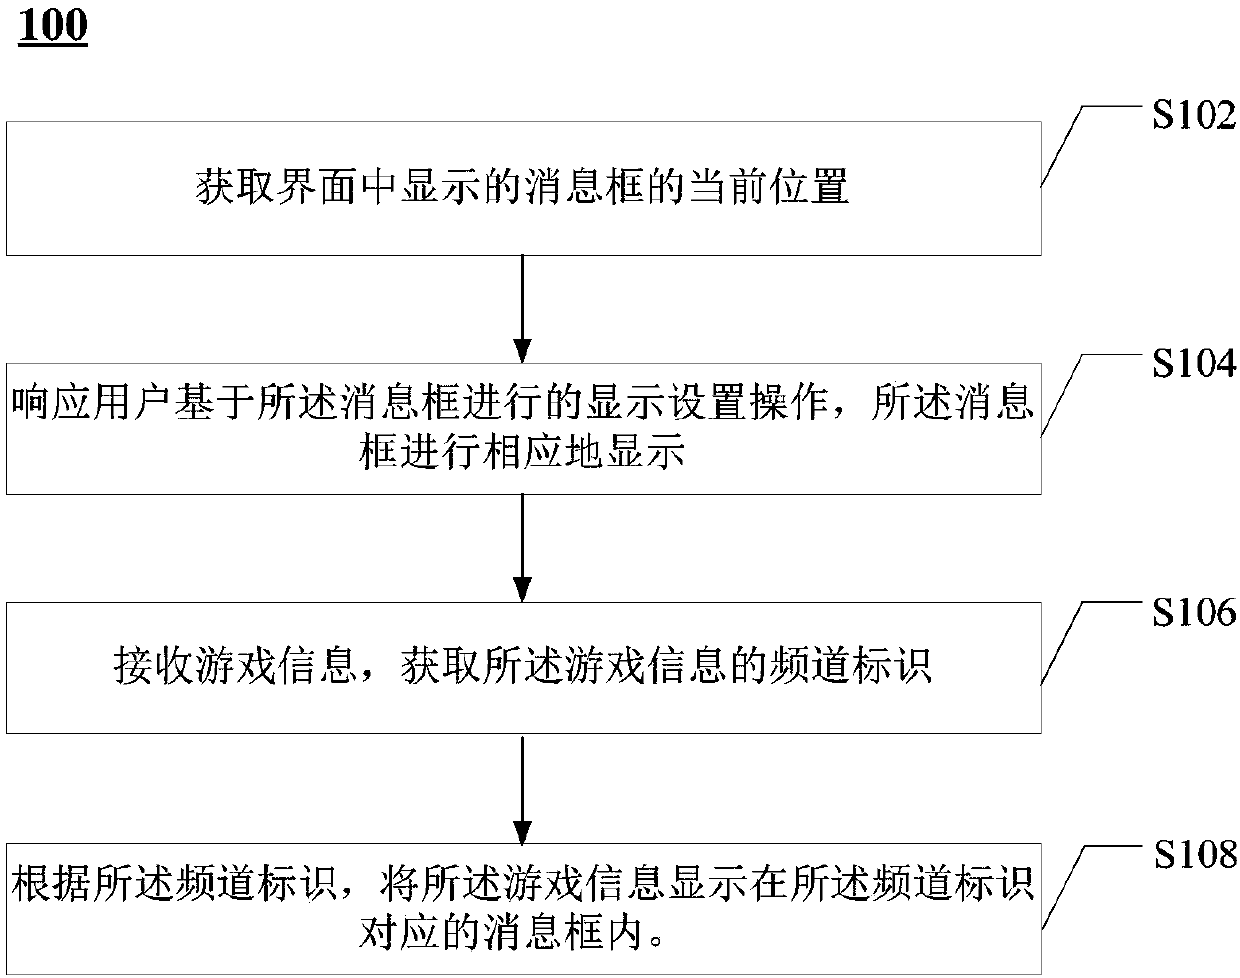 Game information display method and device